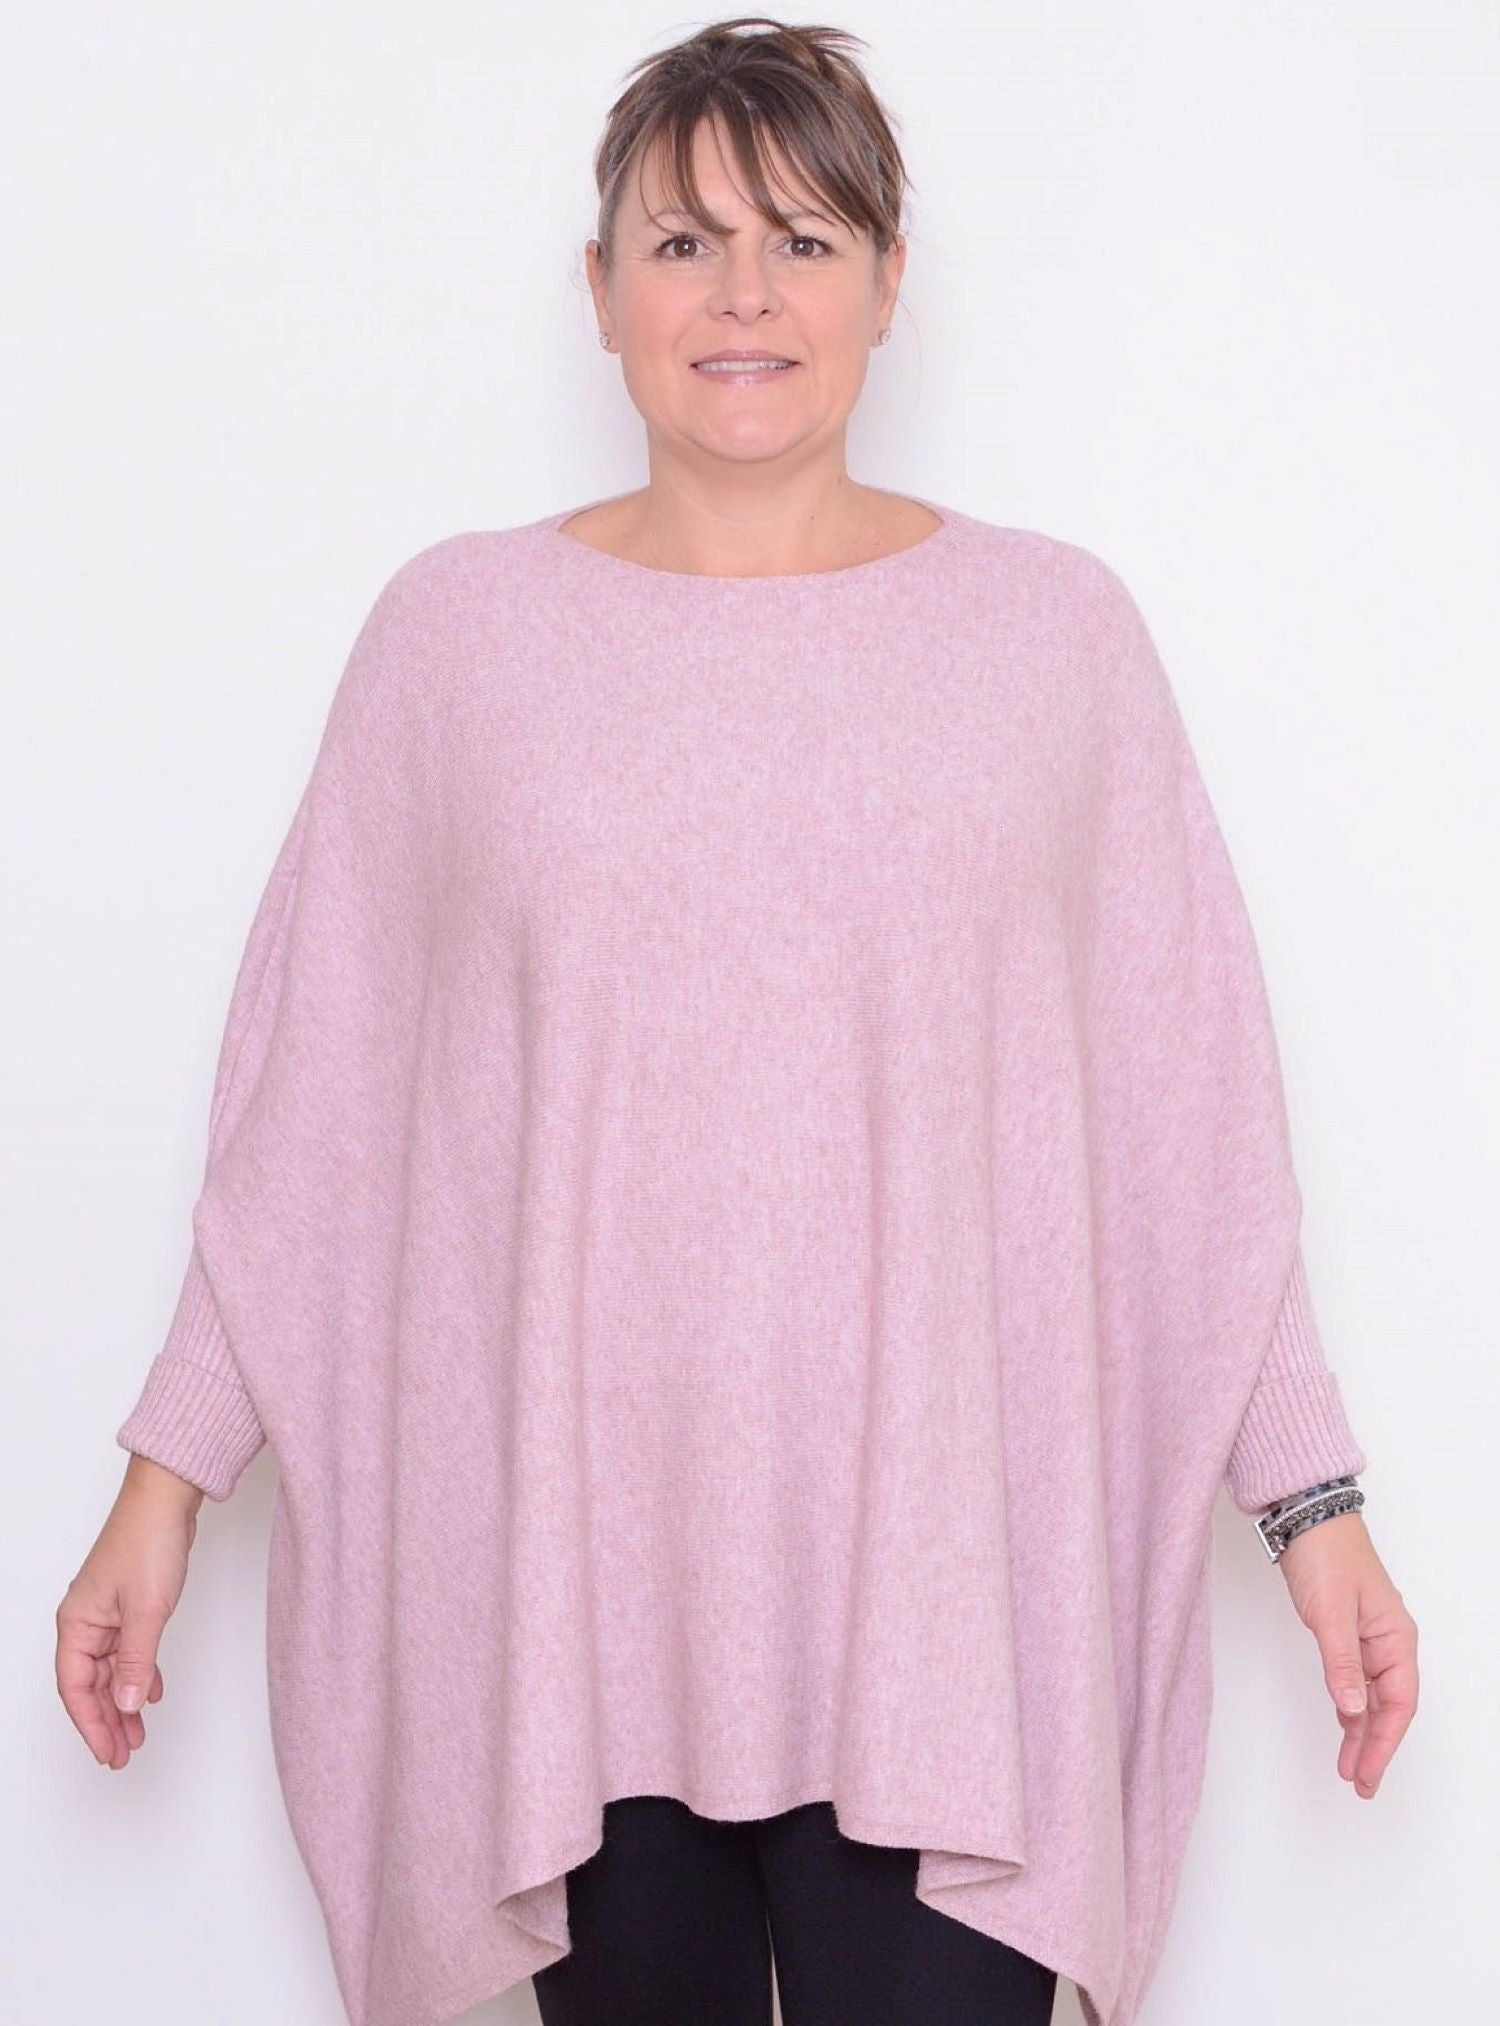 Soft Knit Batwing Sleeve Jumper  - 2700, Jumpers & Cardigans, Pure Plus Clothing, Lagenlook Clothing, Plus Size Fashion, Over 50 Fashion